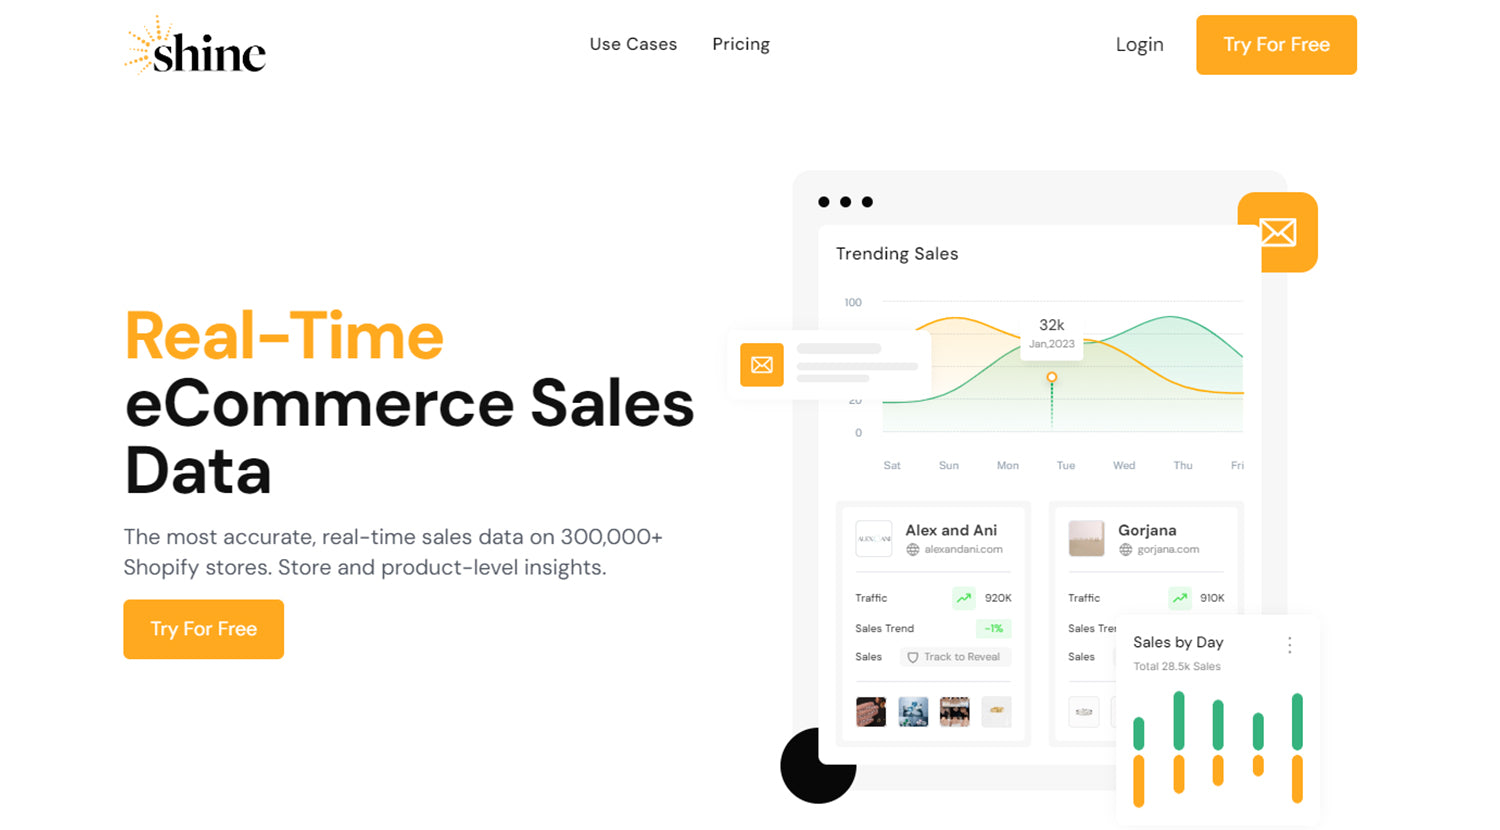 A screenshot of the Shine homepage, outlining the ways this service can graph real-time ecommerce sales data.